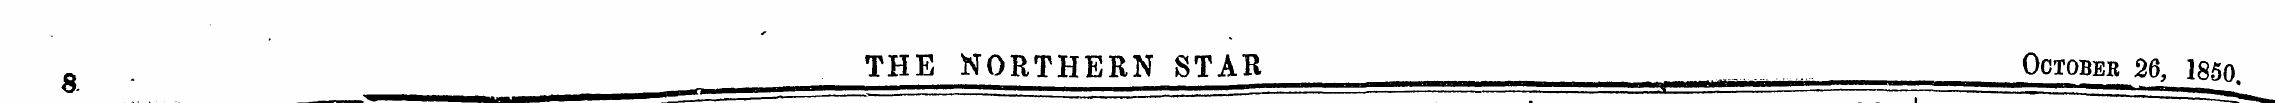 THE NORTHERN STAR October 2d, 1850